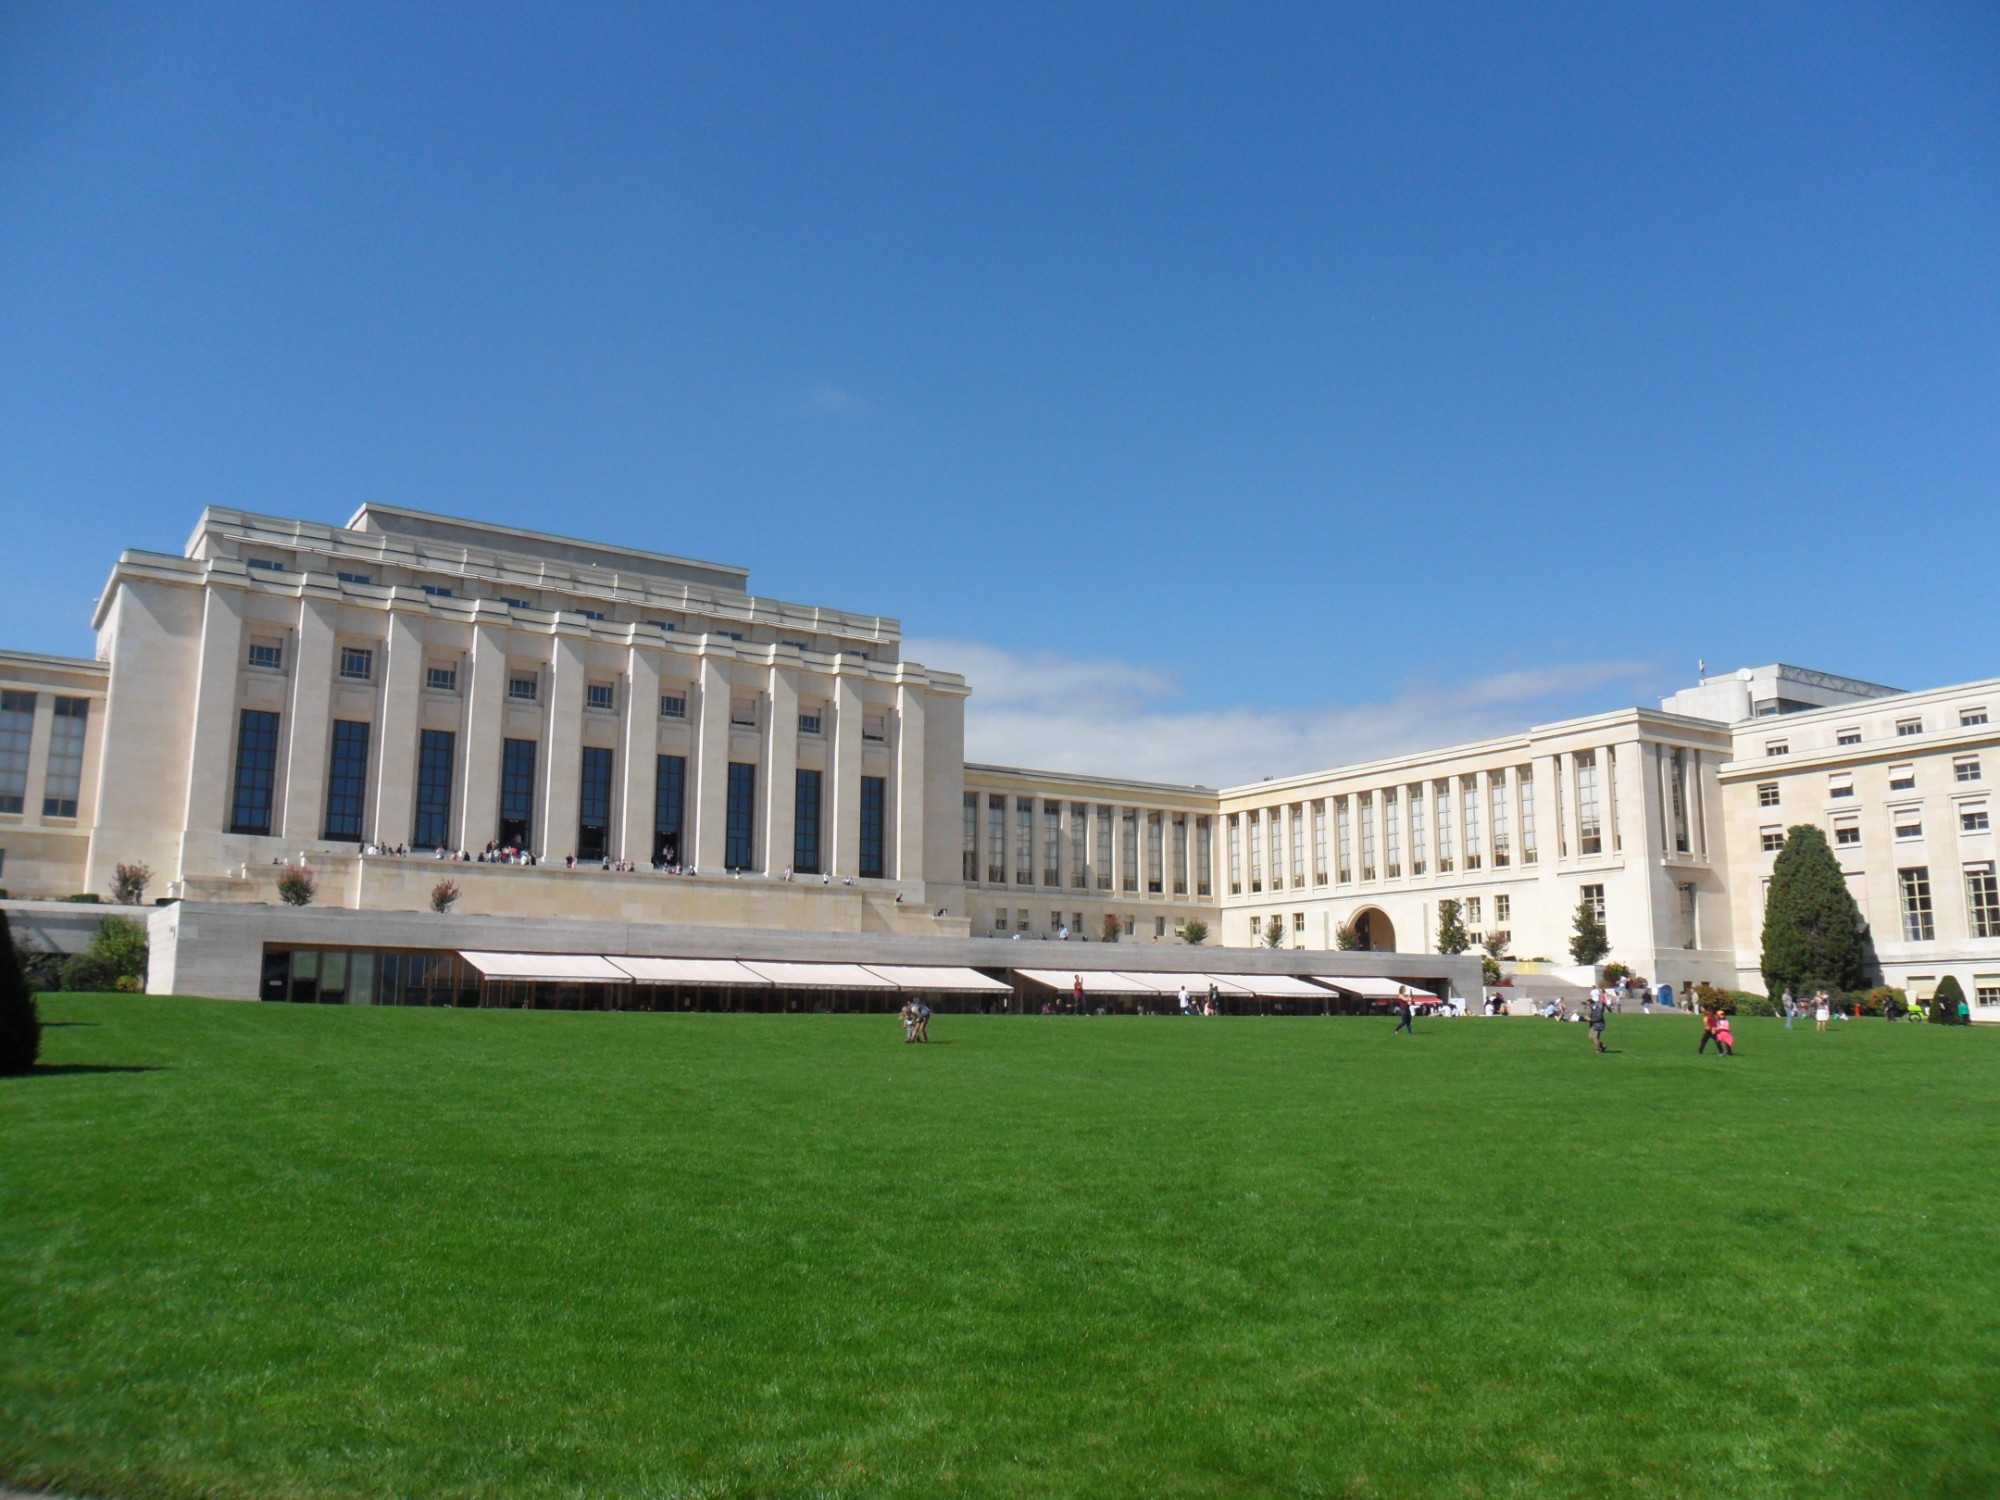 https://commons.wikimedia.org/wiki/File:UN_Building_A_Southern_Lawn.jpg